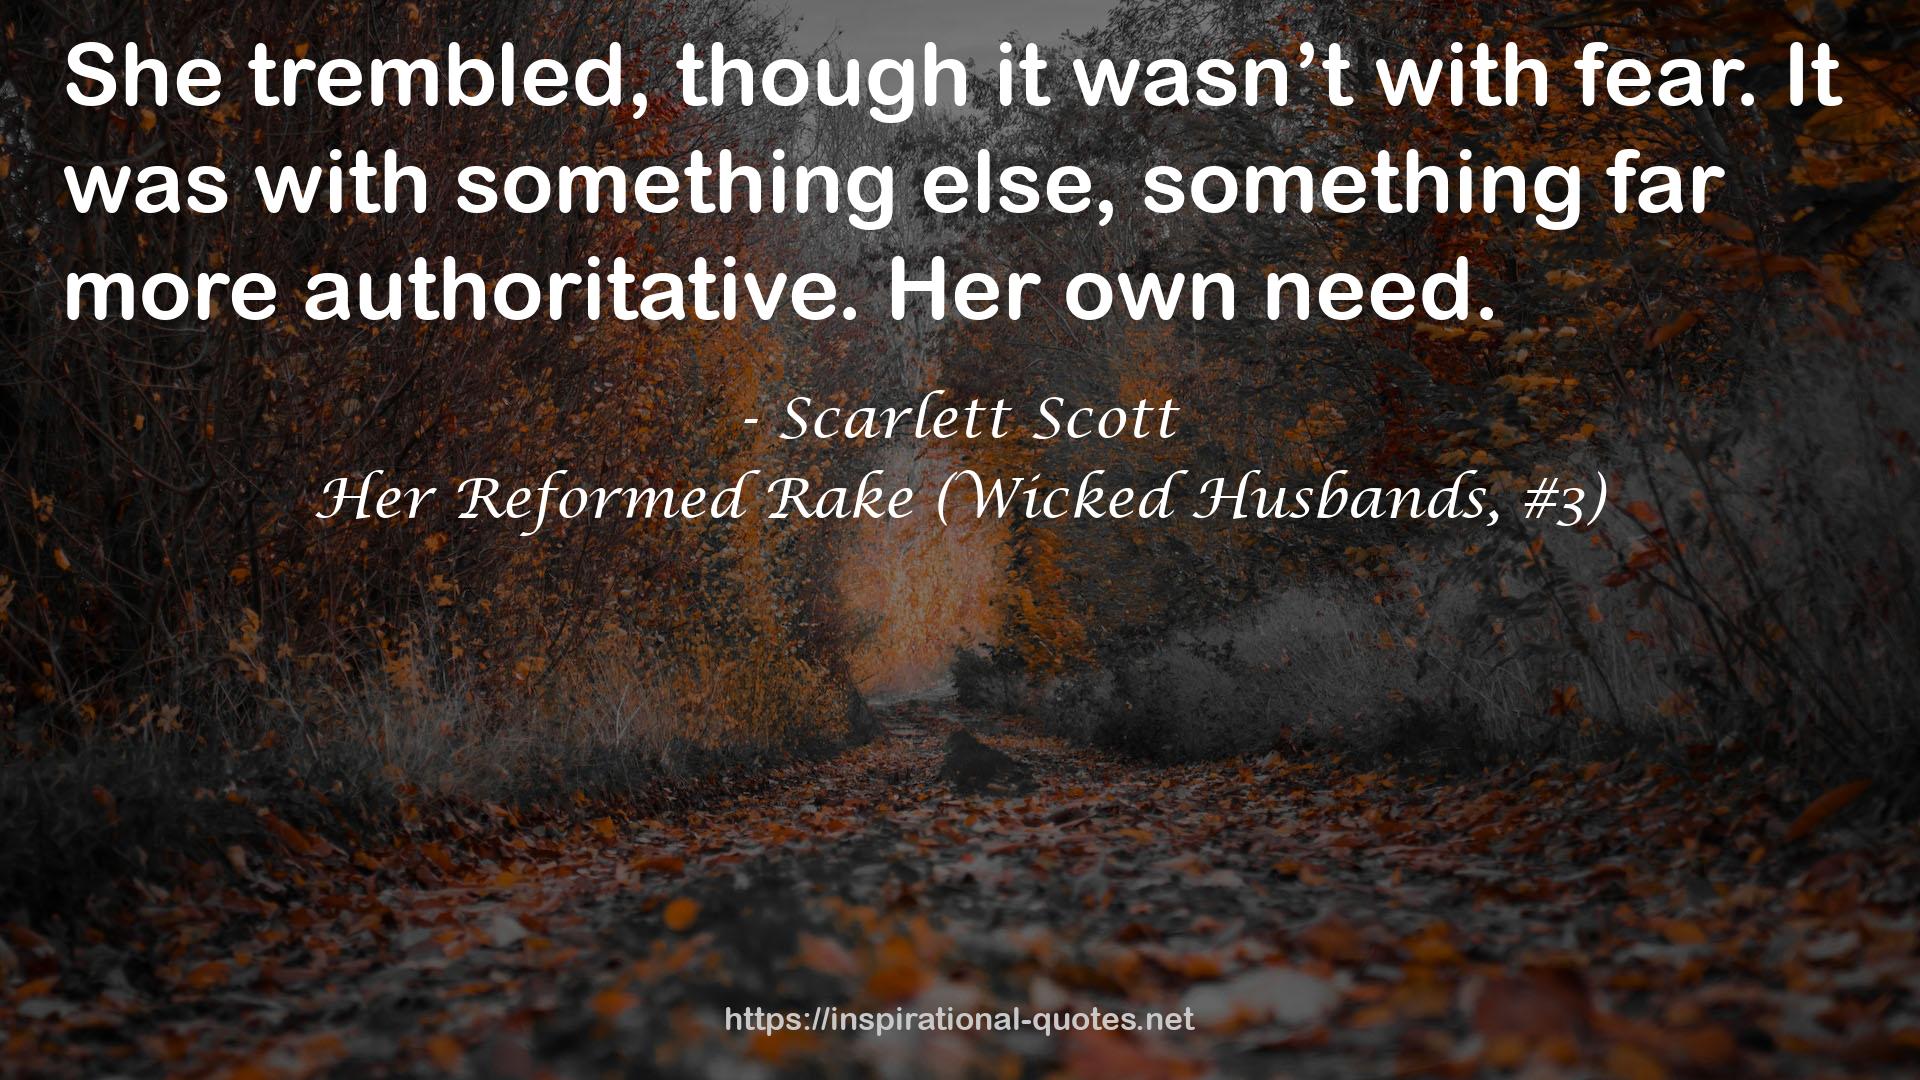 Her Reformed Rake (Wicked Husbands, #3) QUOTES